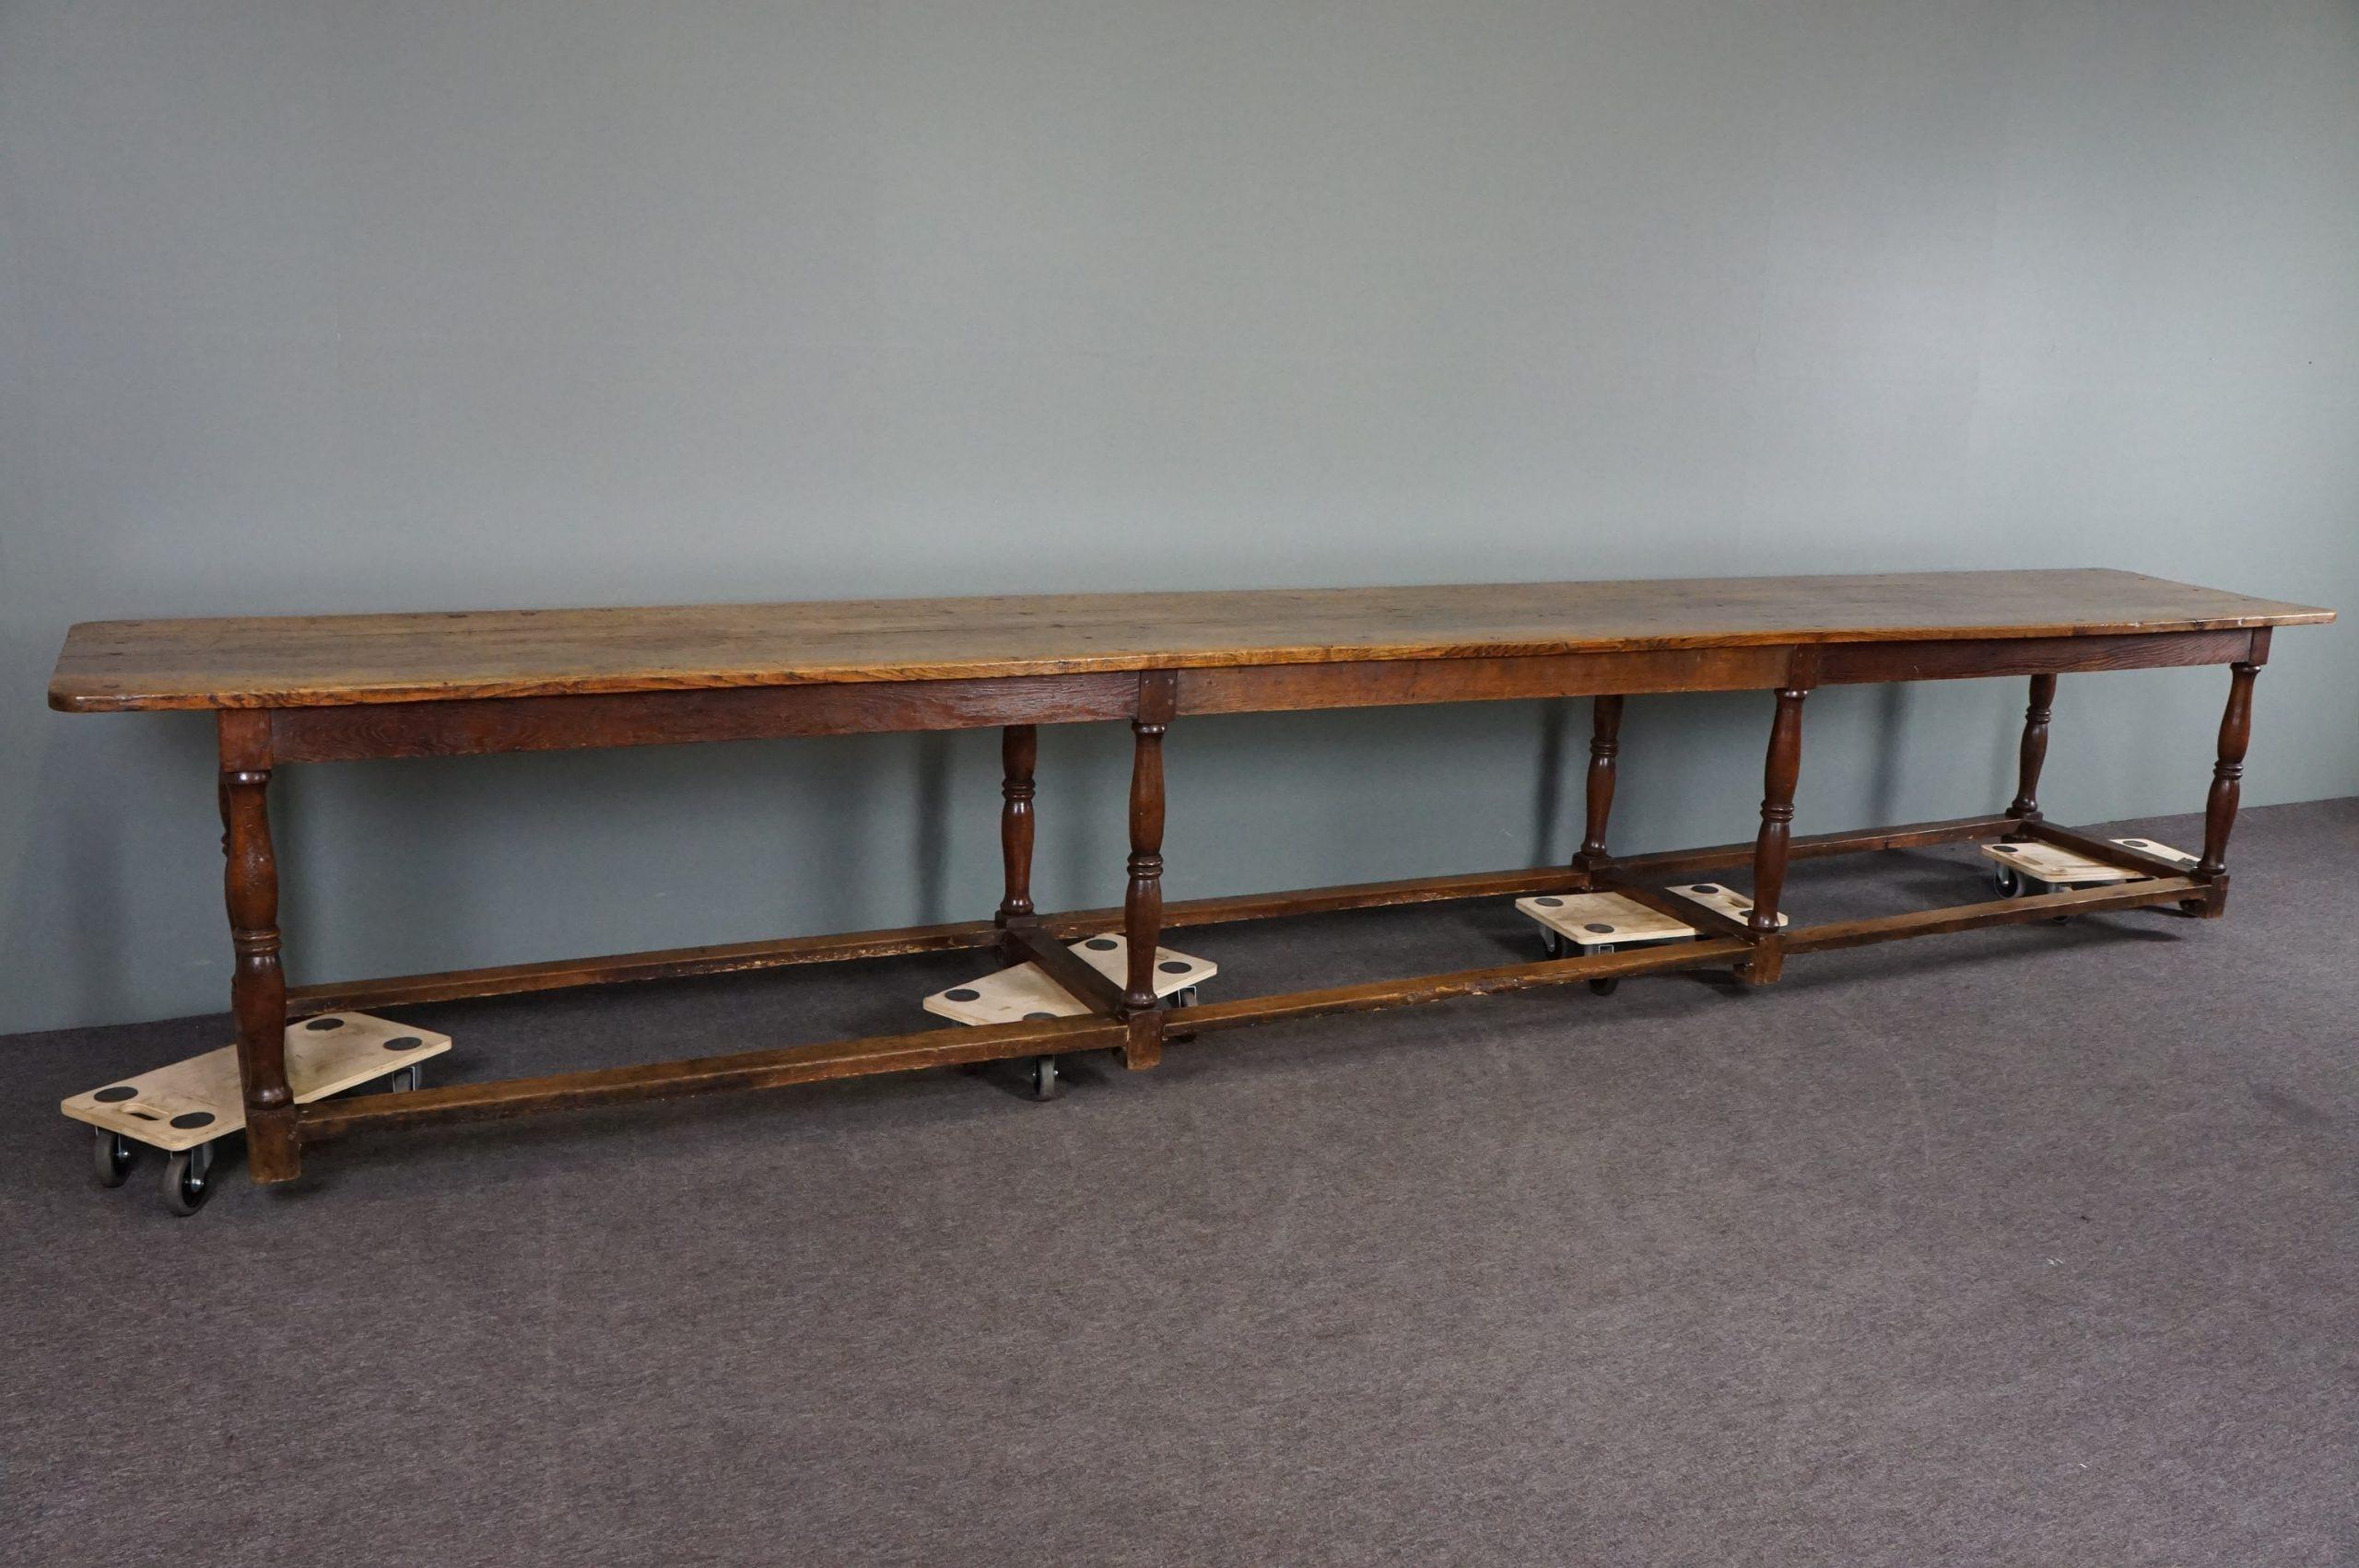 Edwardian Very long antique 19th century English oak diningtable, 5 meter, Refectory table For Sale